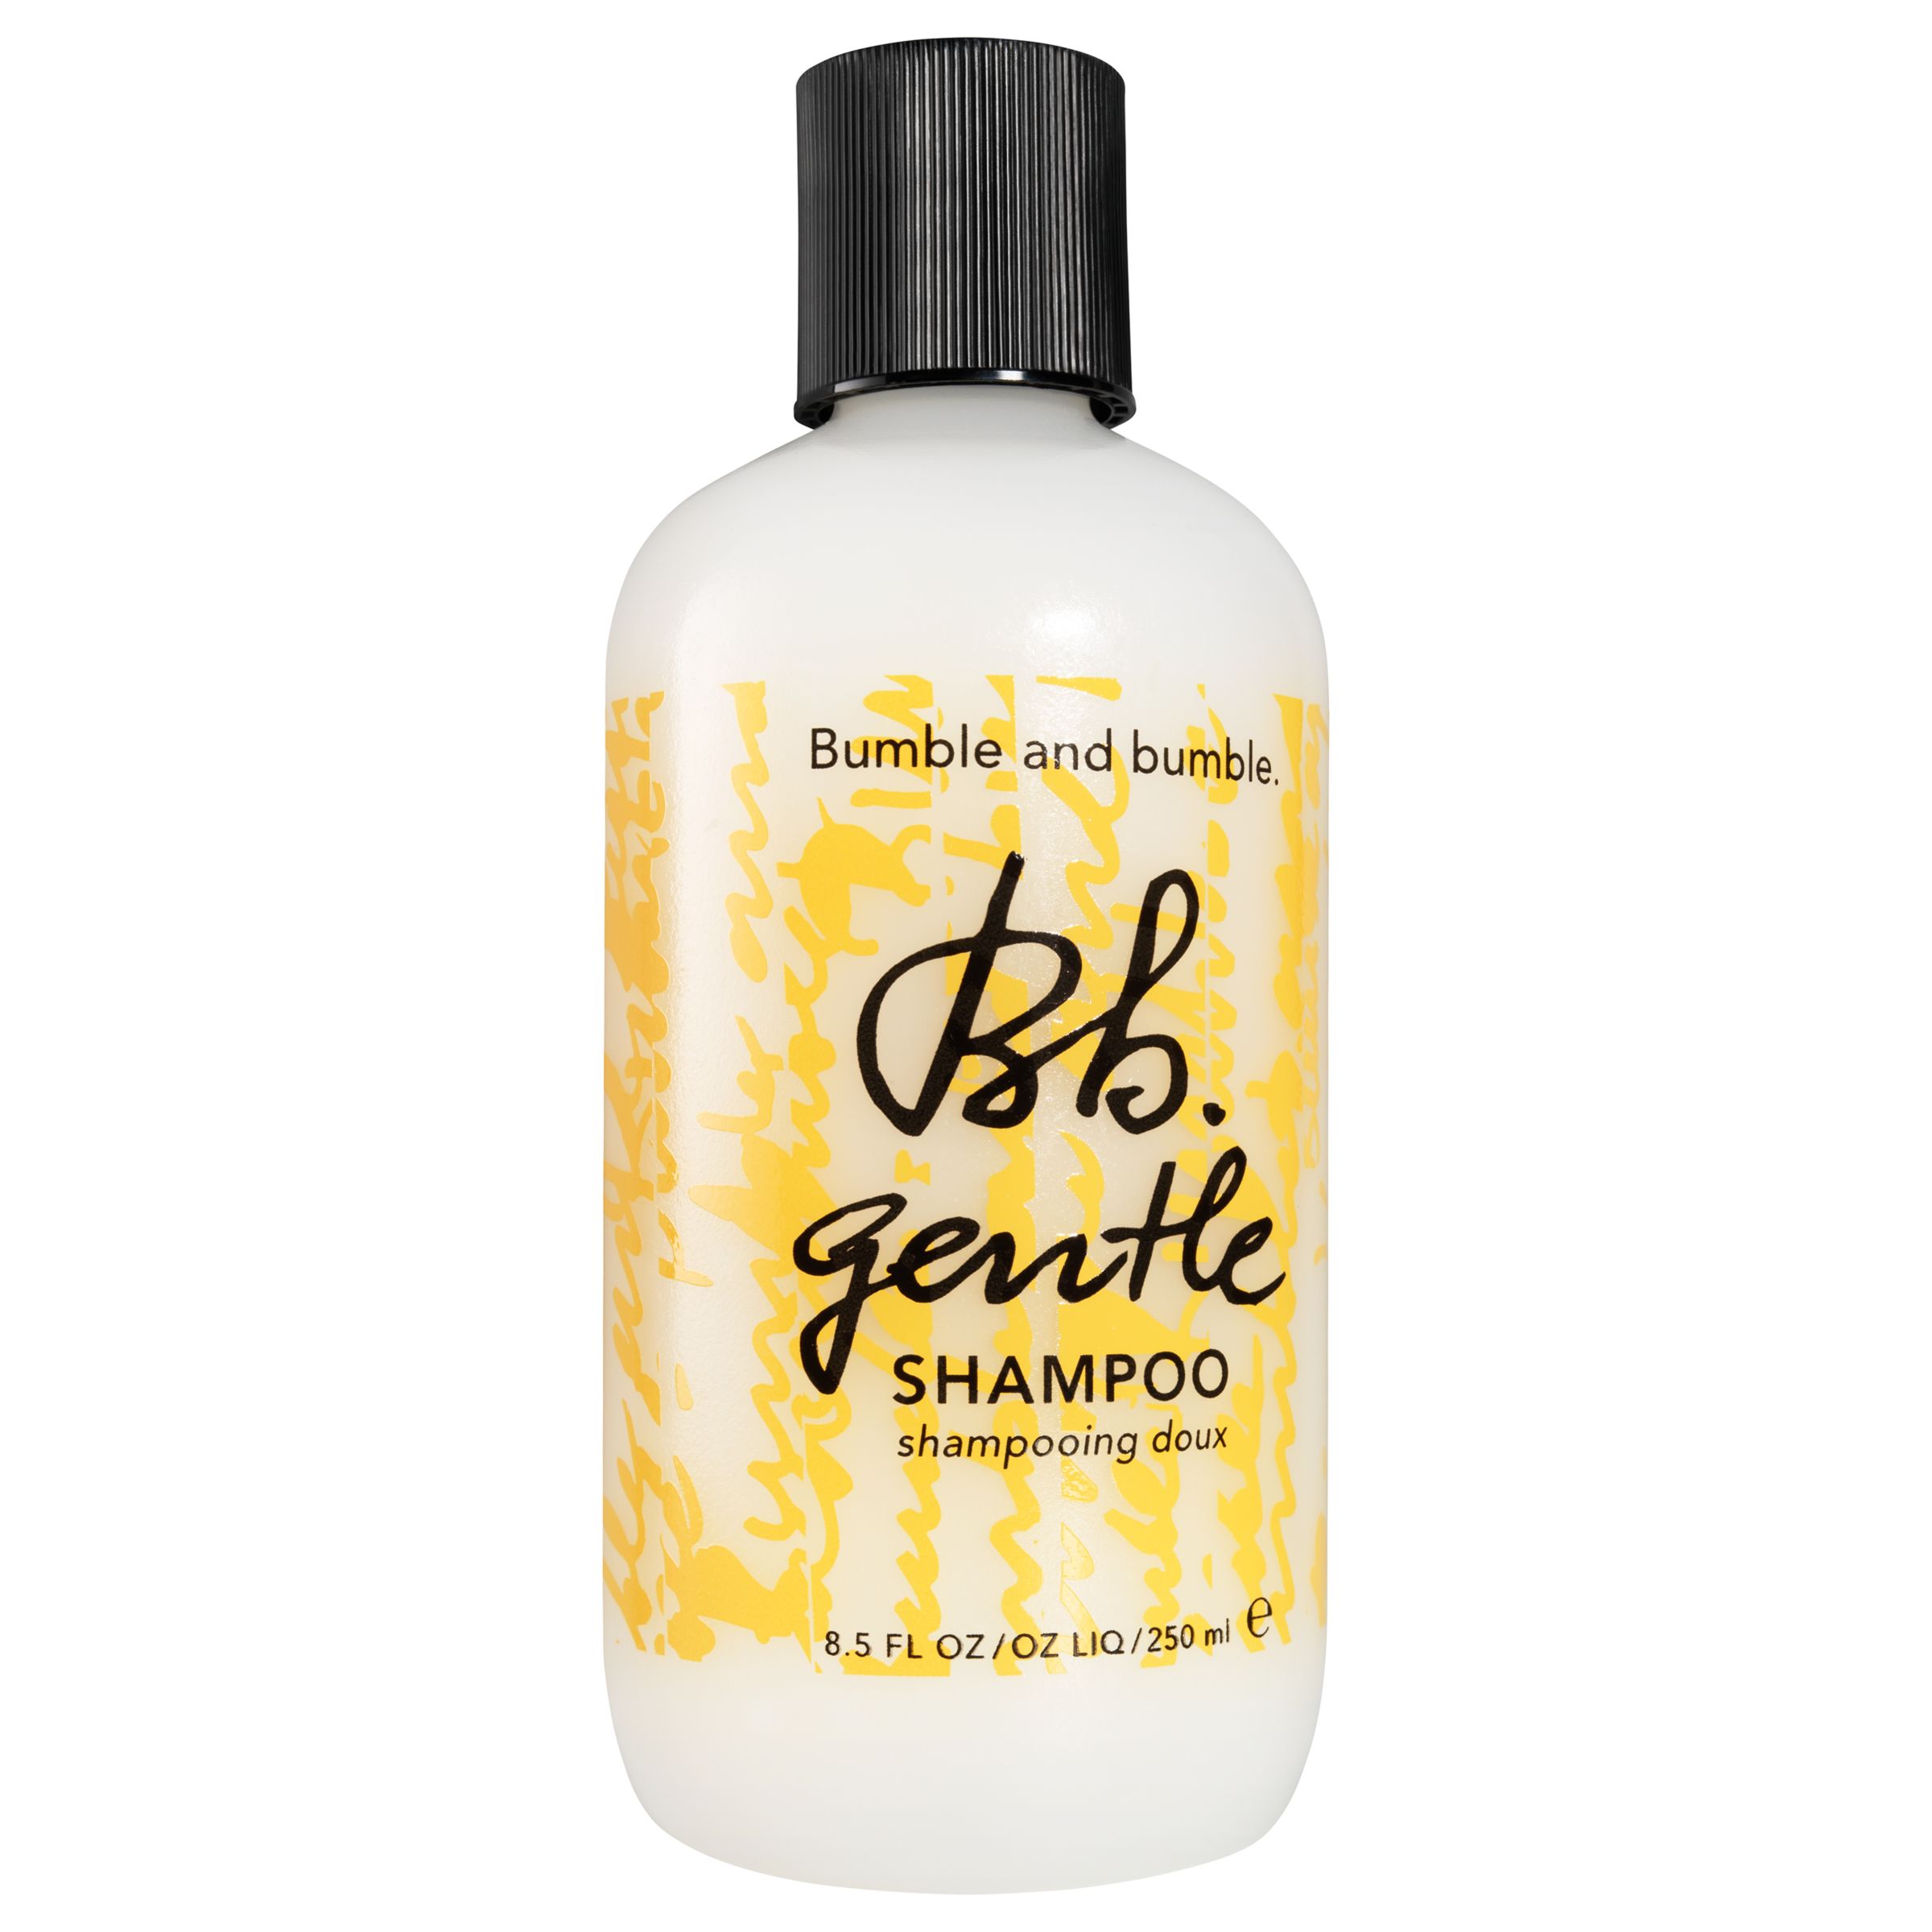 Bumble and bumble Gentle Shampoo, 250ml 1